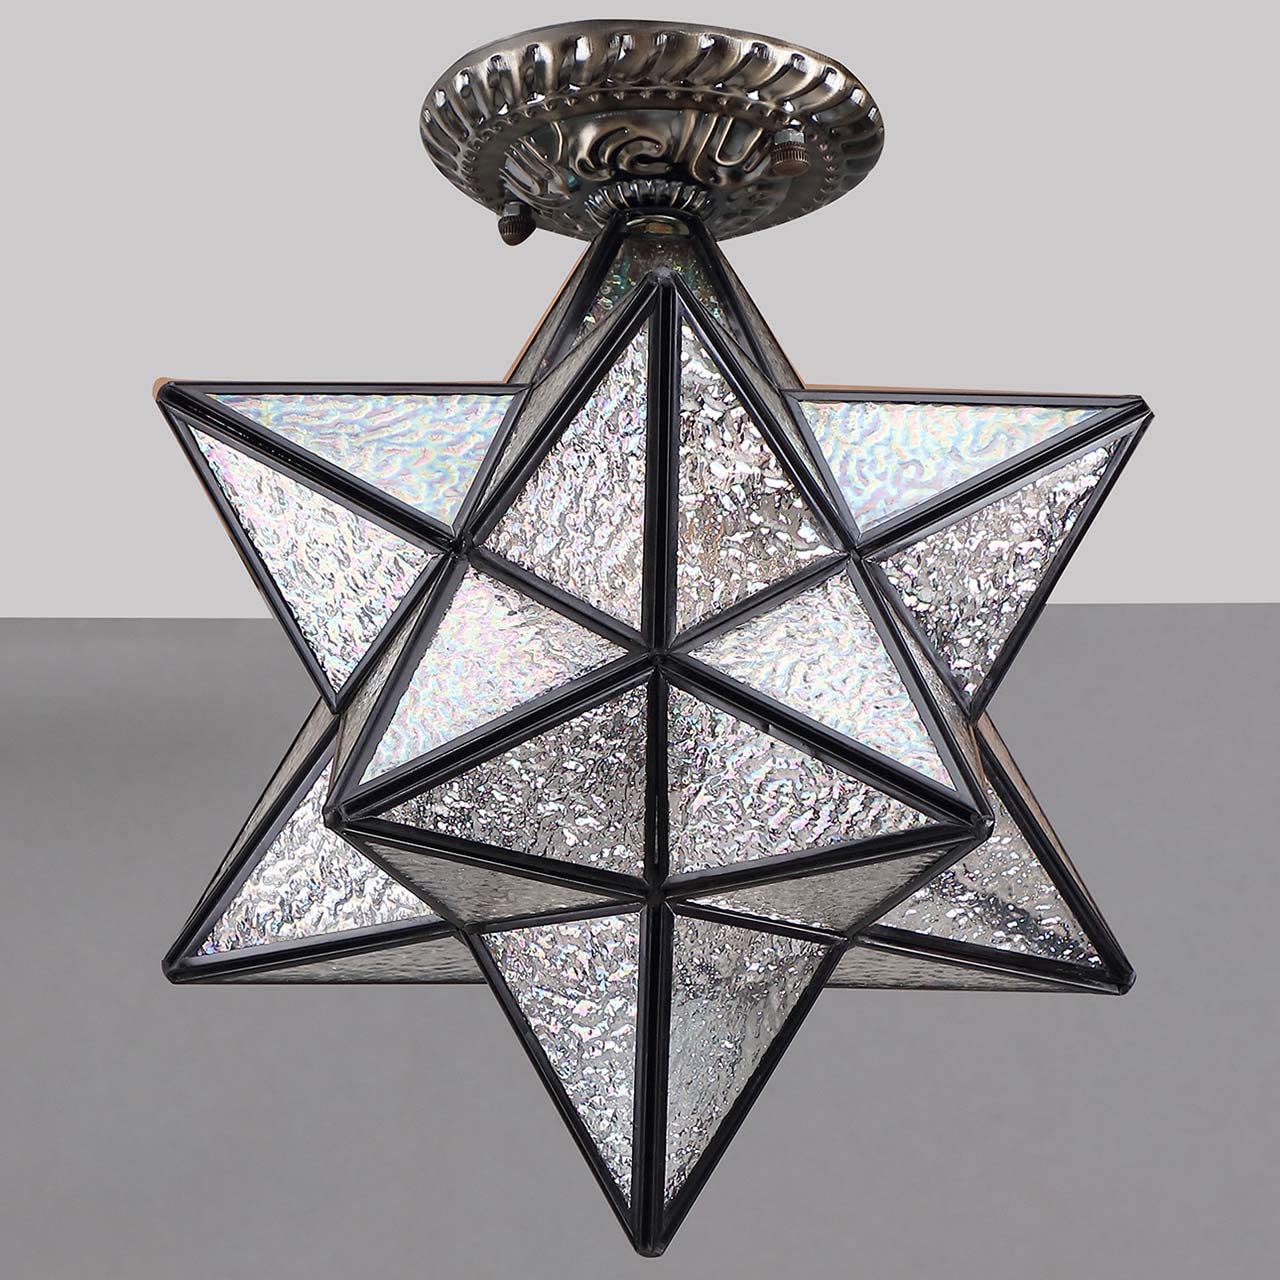 Moravian Star ceiling light fixture tiffany flush mount ceiling lamp with Iridescent shade